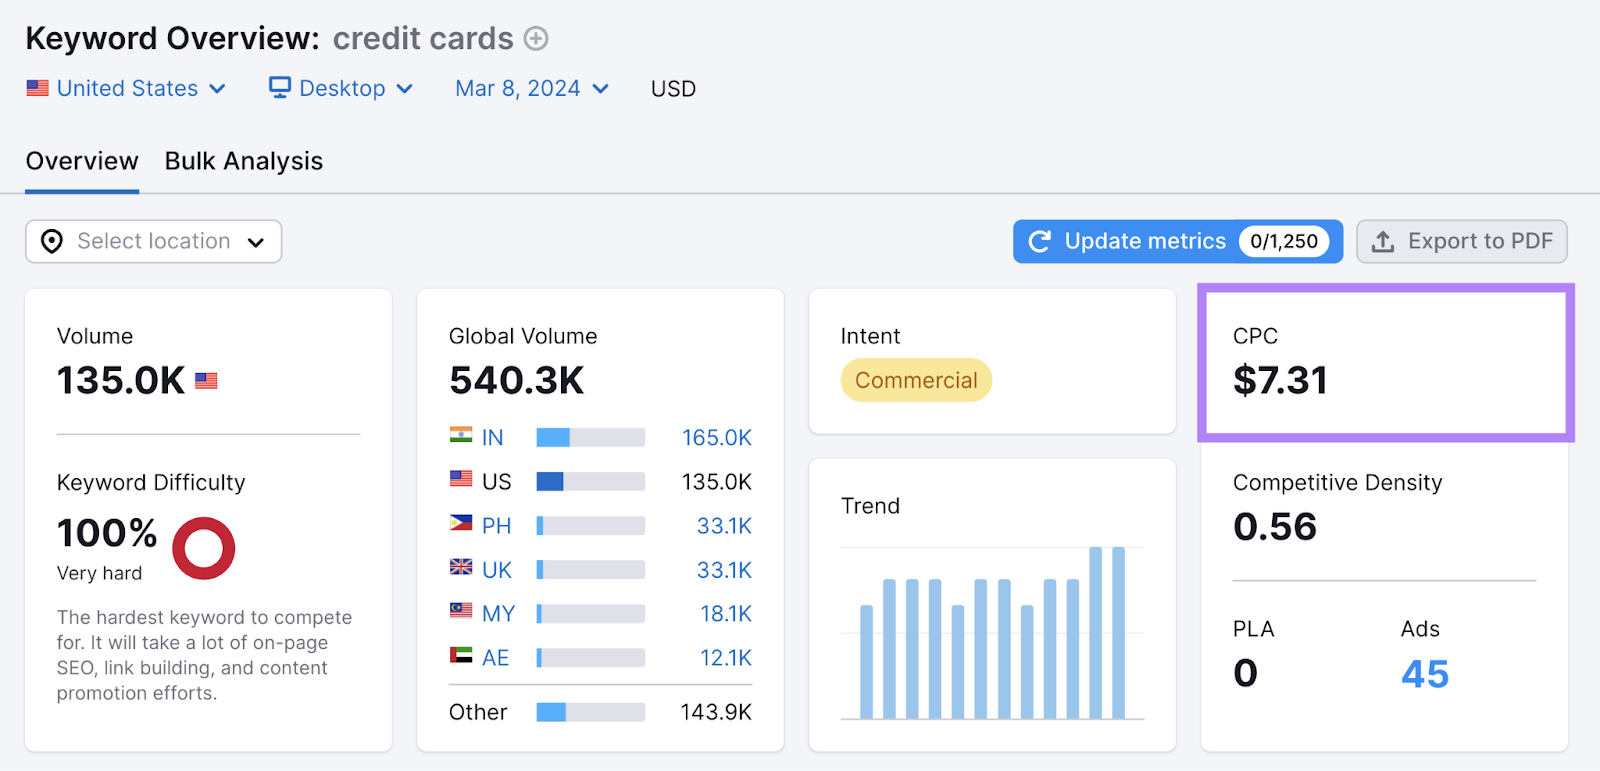 Cost per click metric for "credit cards" shown in Keyword Overview